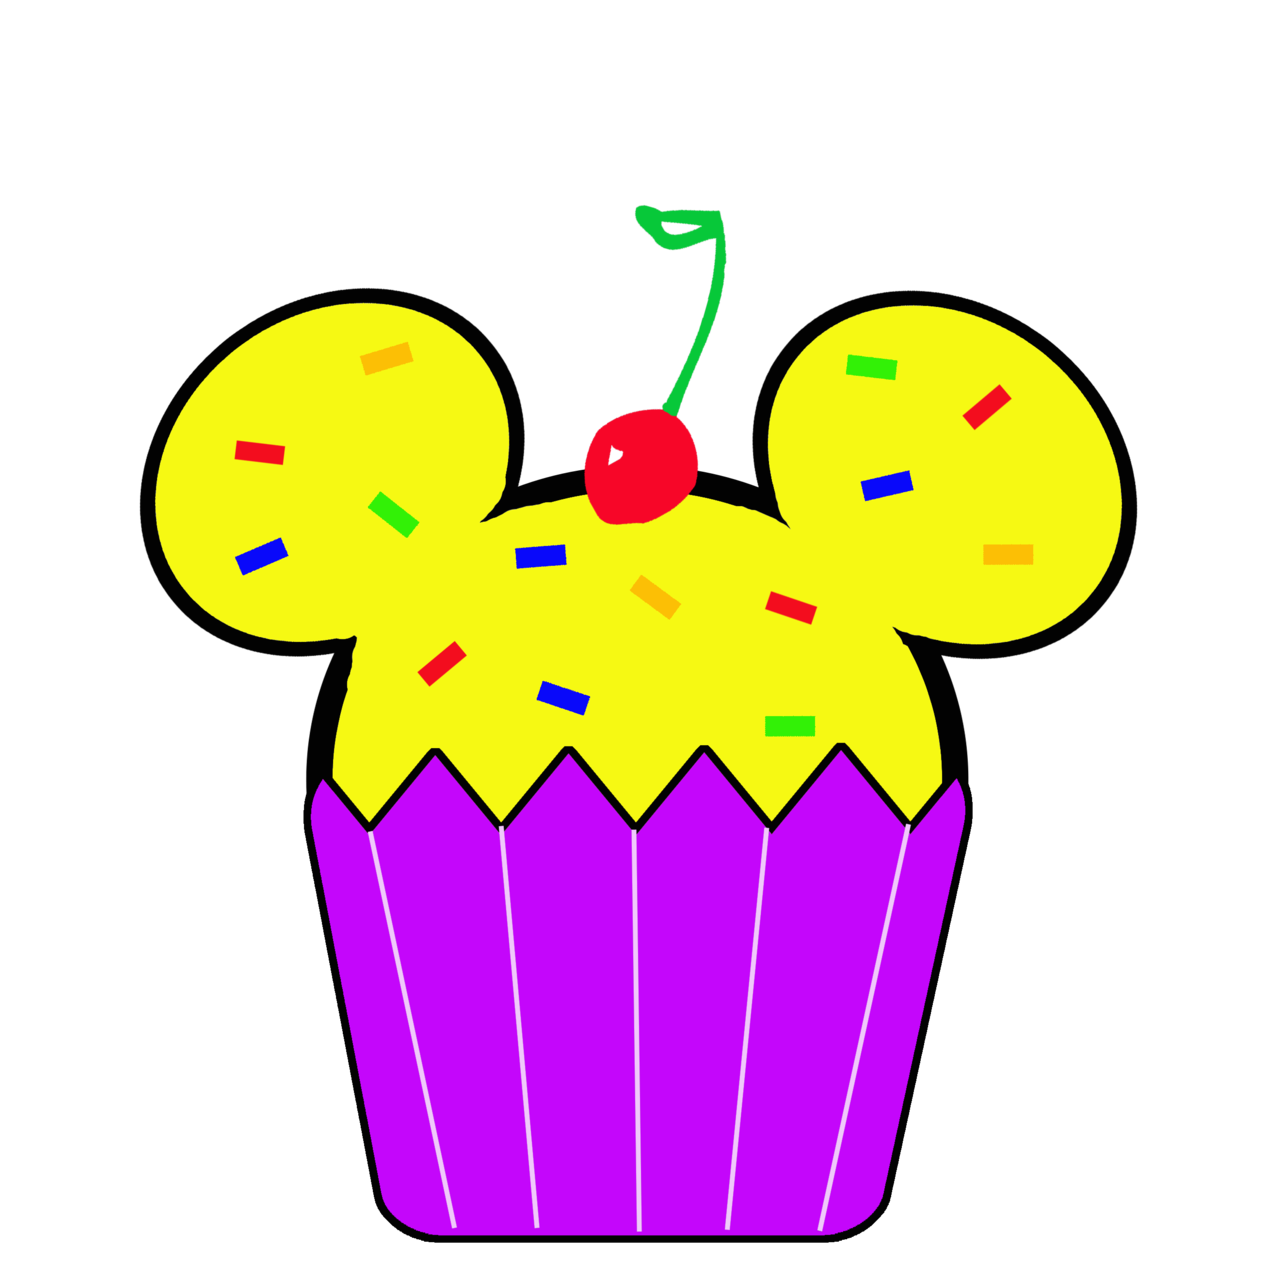 Mickey cupcake clipart? - The DIS Discussion Forums - DISboards.